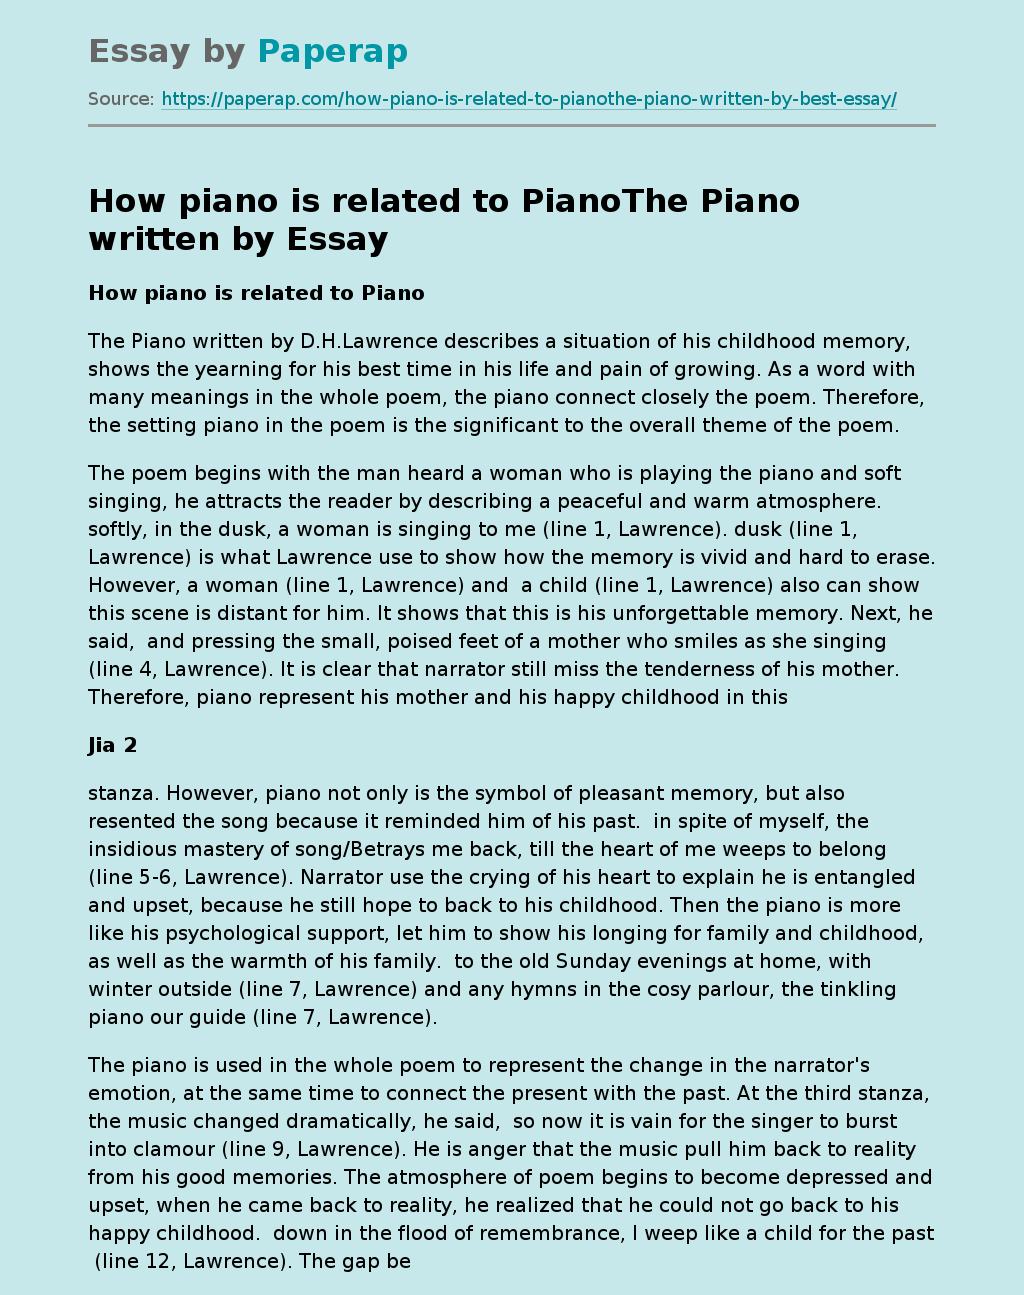 essay on my favourite musical instrument piano